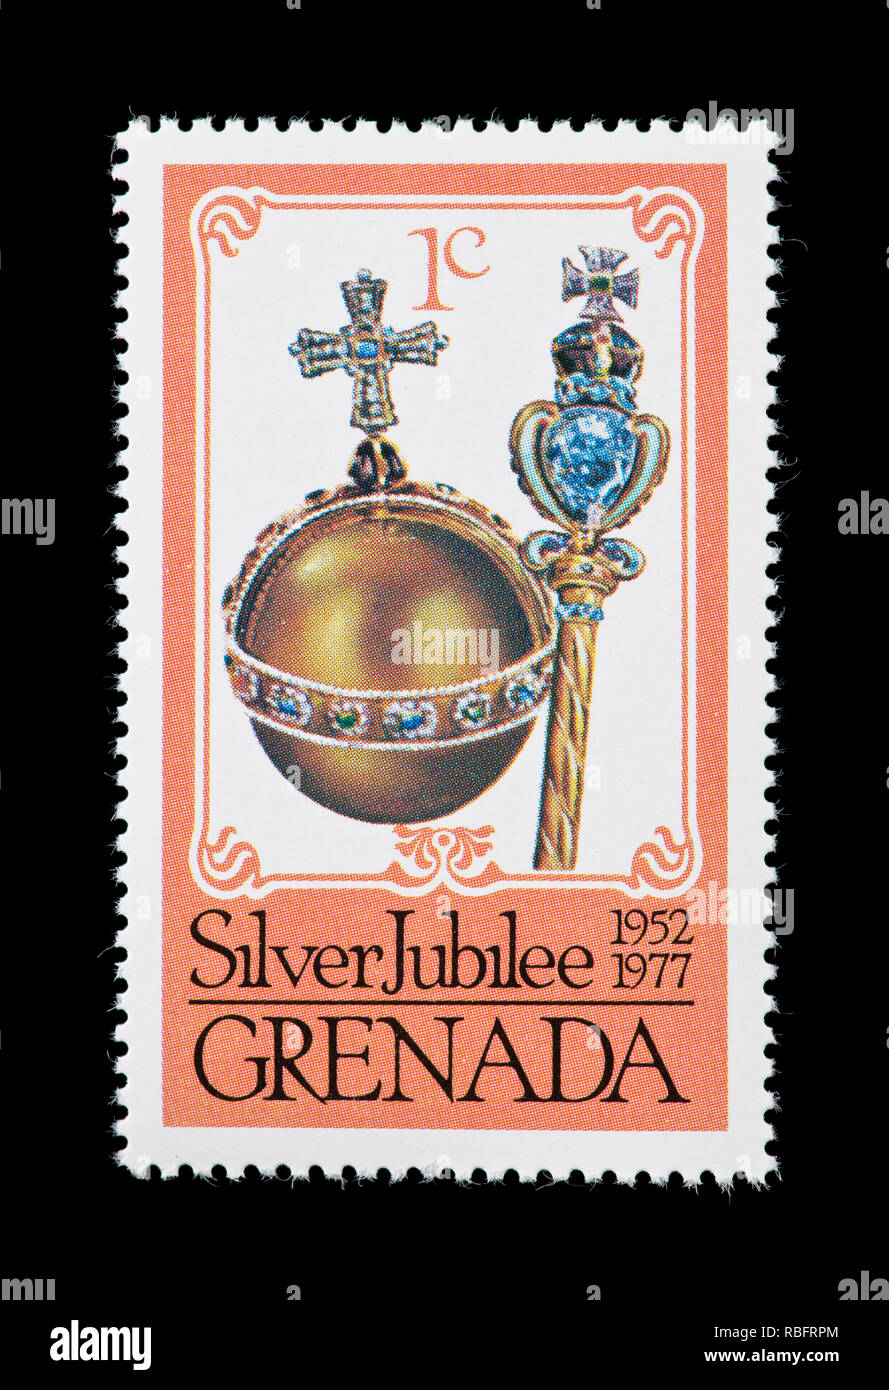 Postage stamp from Grenada depicting the orb and scepter, issued for the 25th anniversary of the coronation of Queen Elizabeth II. Stock Photo